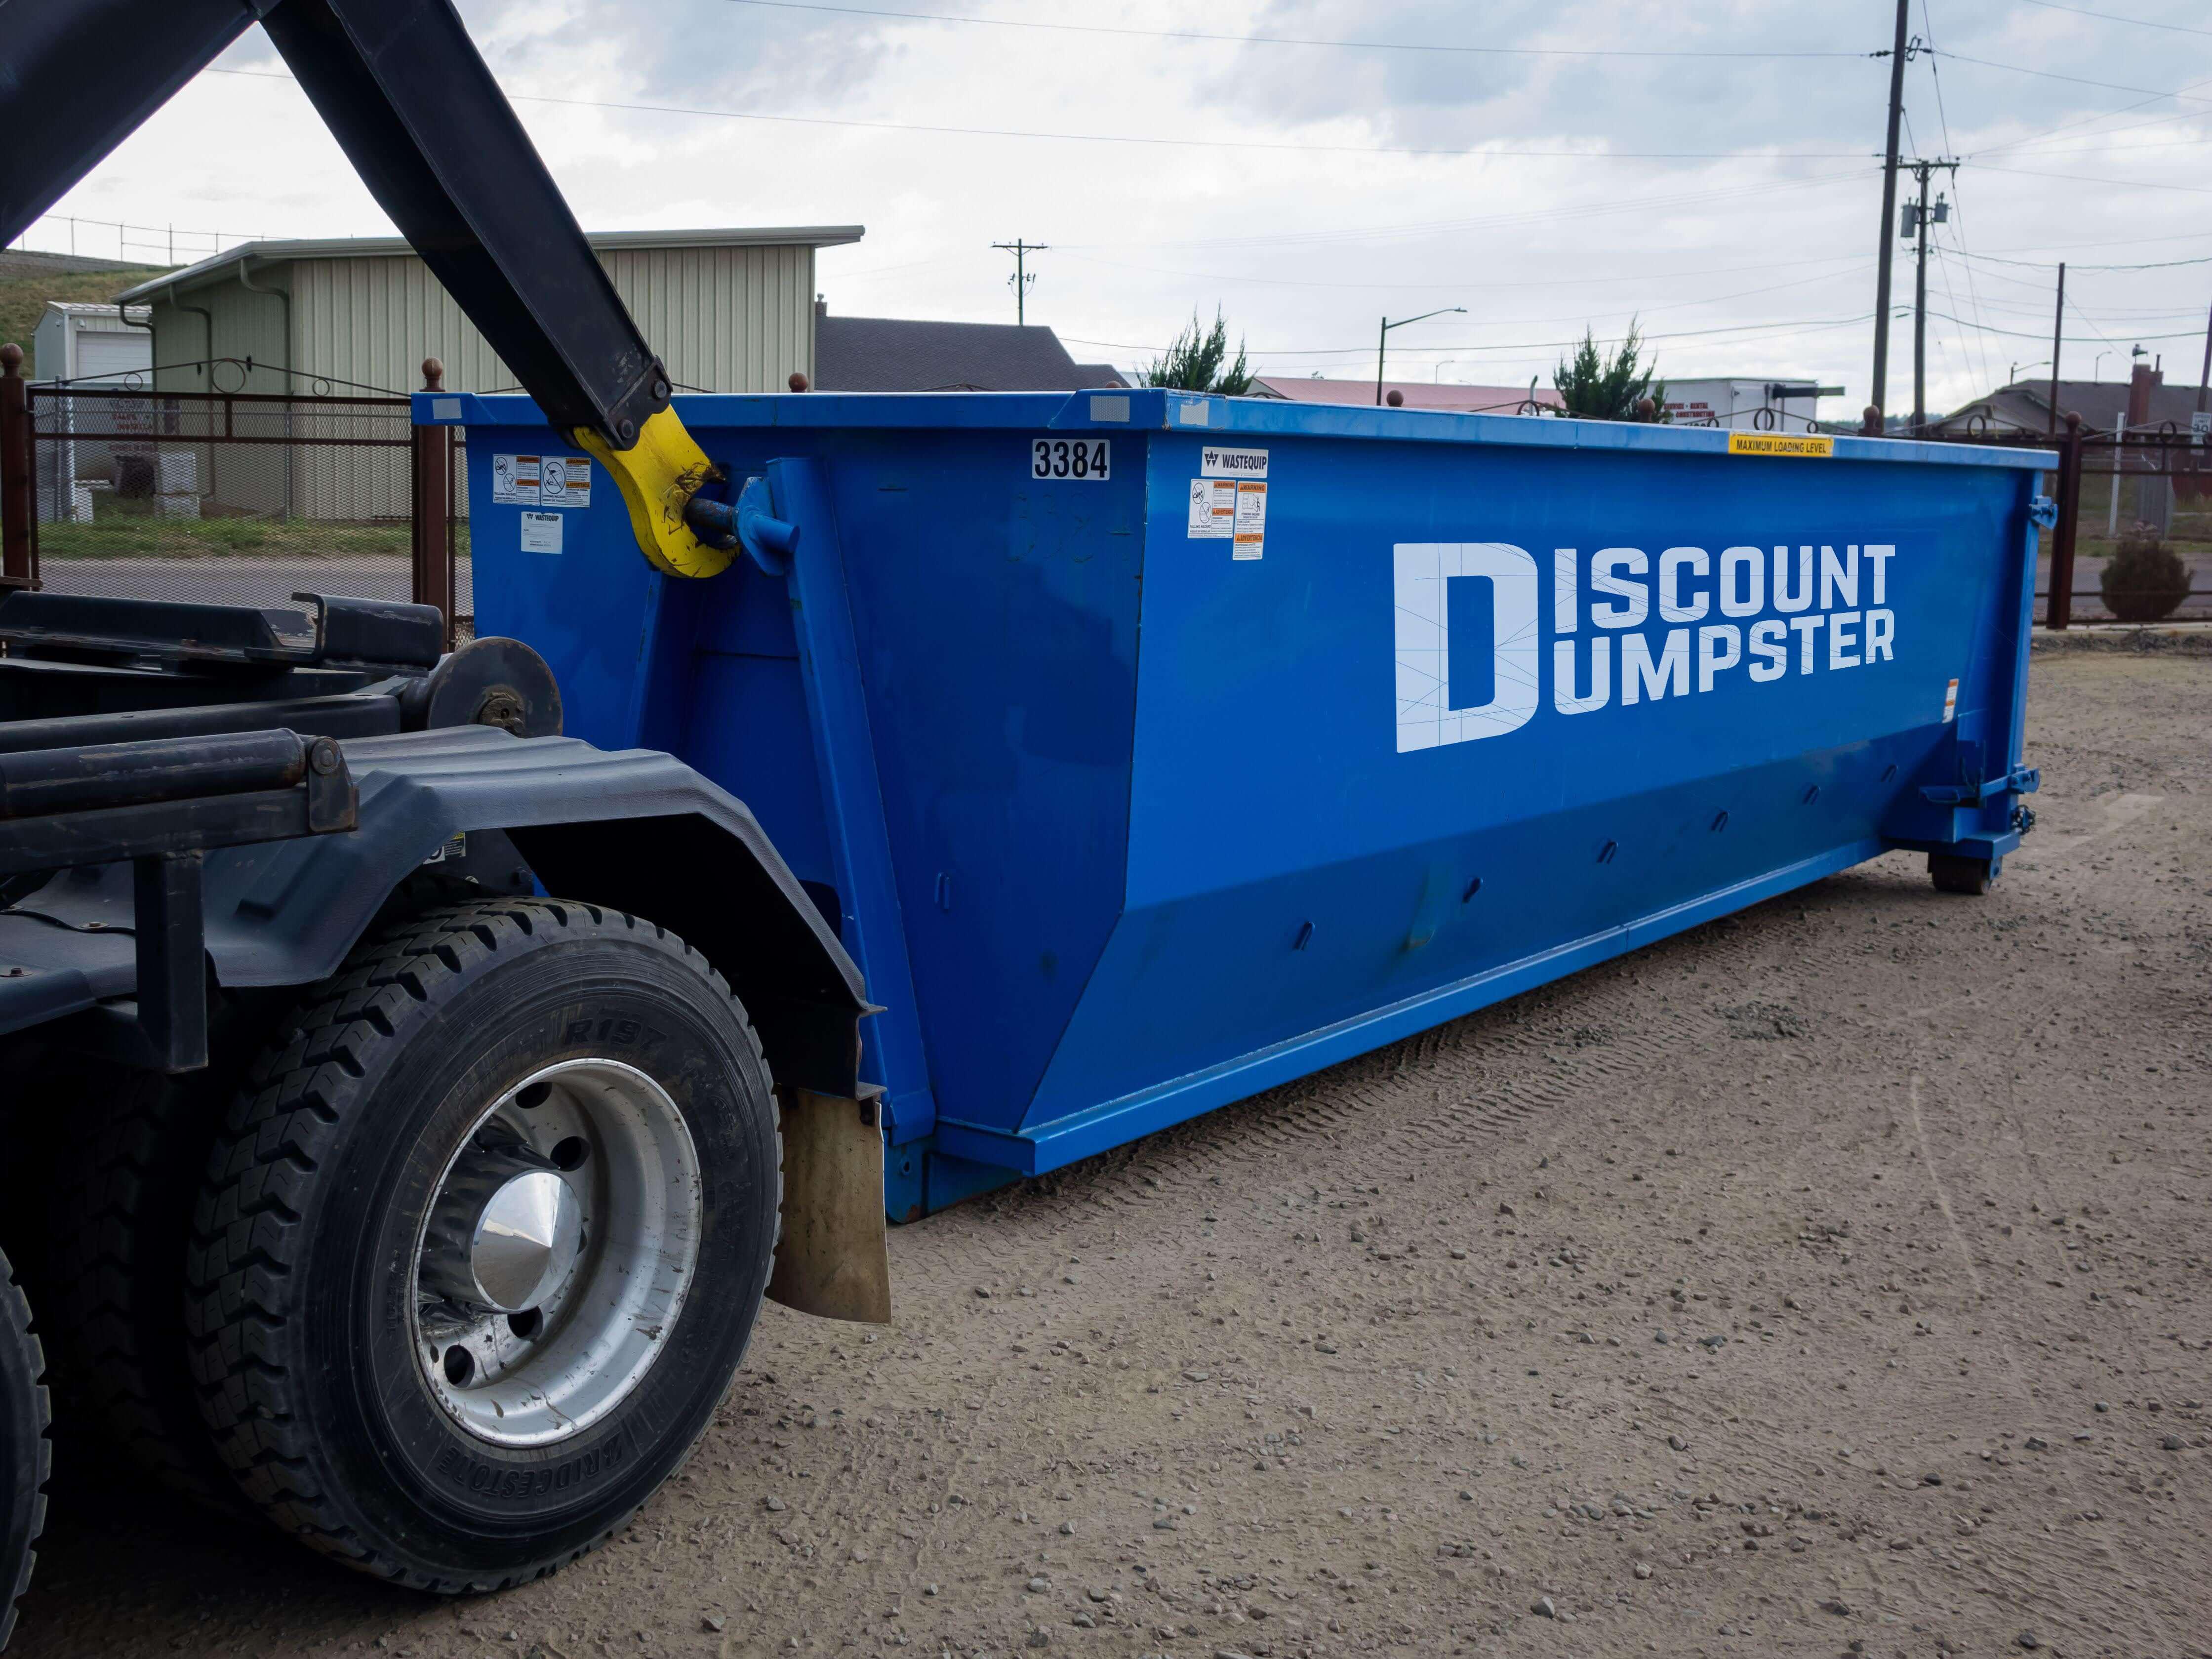 Call discount dumpster in Chicago il to learn about our quality roll off dumpsters Discount Dumpster Chicago (312)549-9198